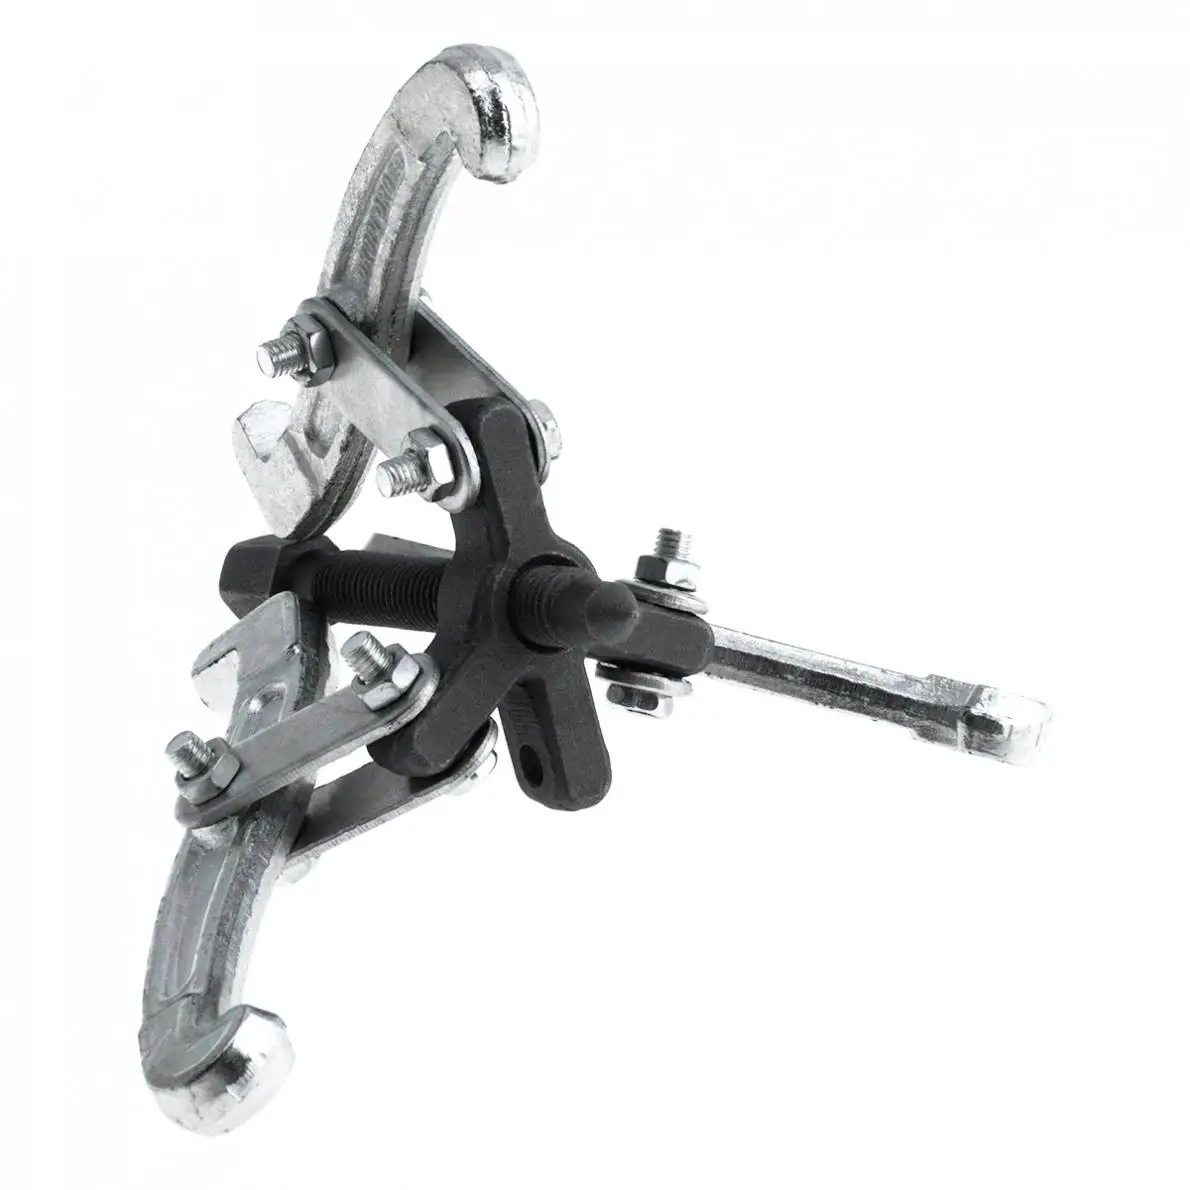 45# Steel 2 Claws / 3 Claws Bearing Puller Multi-purpose Rama with 4 Single Hole Claw Pullers for Car / Mechanical Repairing